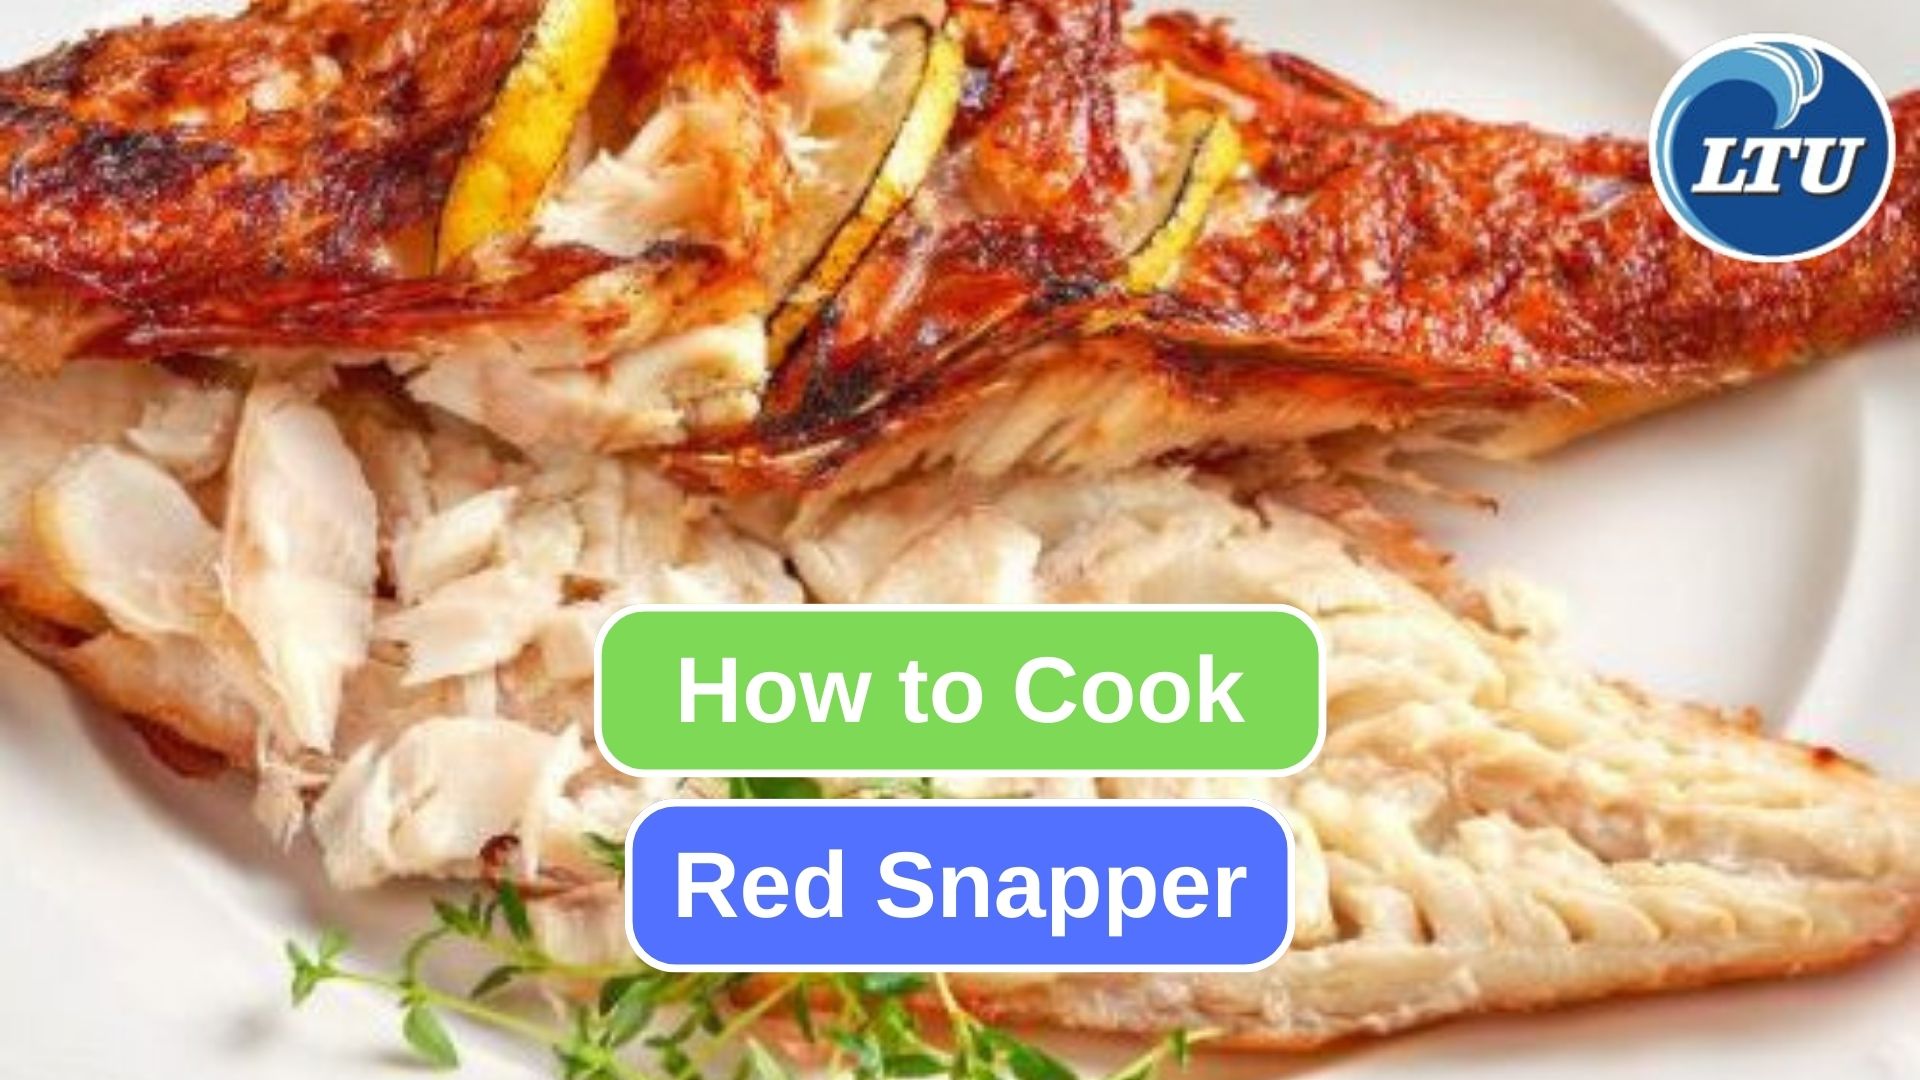 Some Cooking Methods You Can Use to Cook Red Snapper